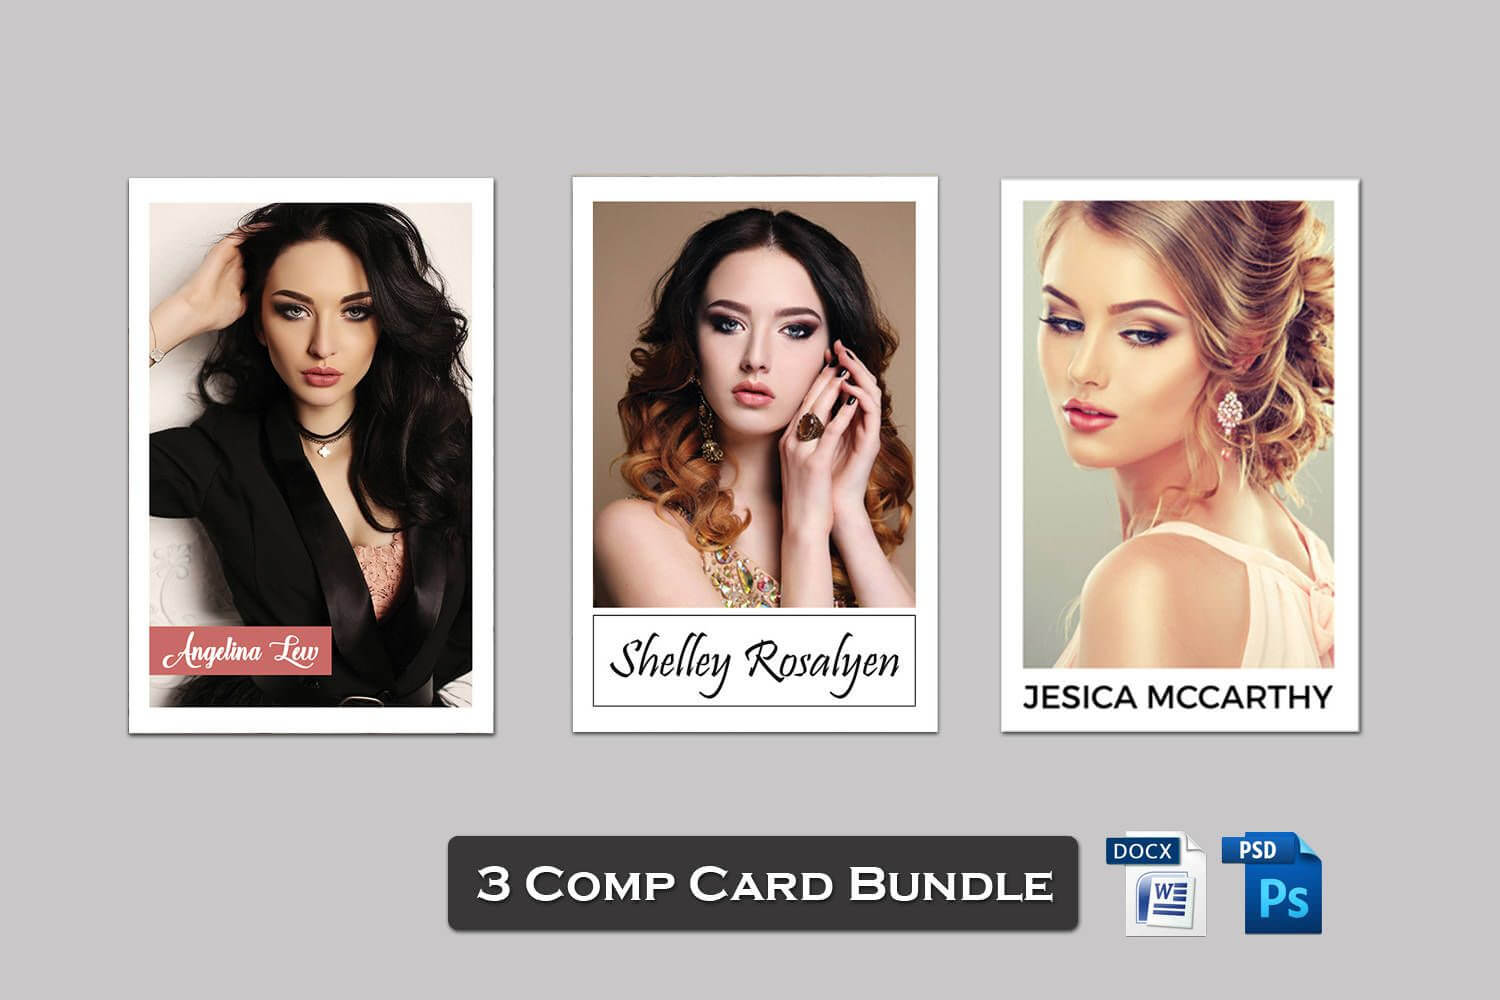 3 Model Comp Card Template Bundle | Modeling Comp Card Model Throughout Zed Card Template Free